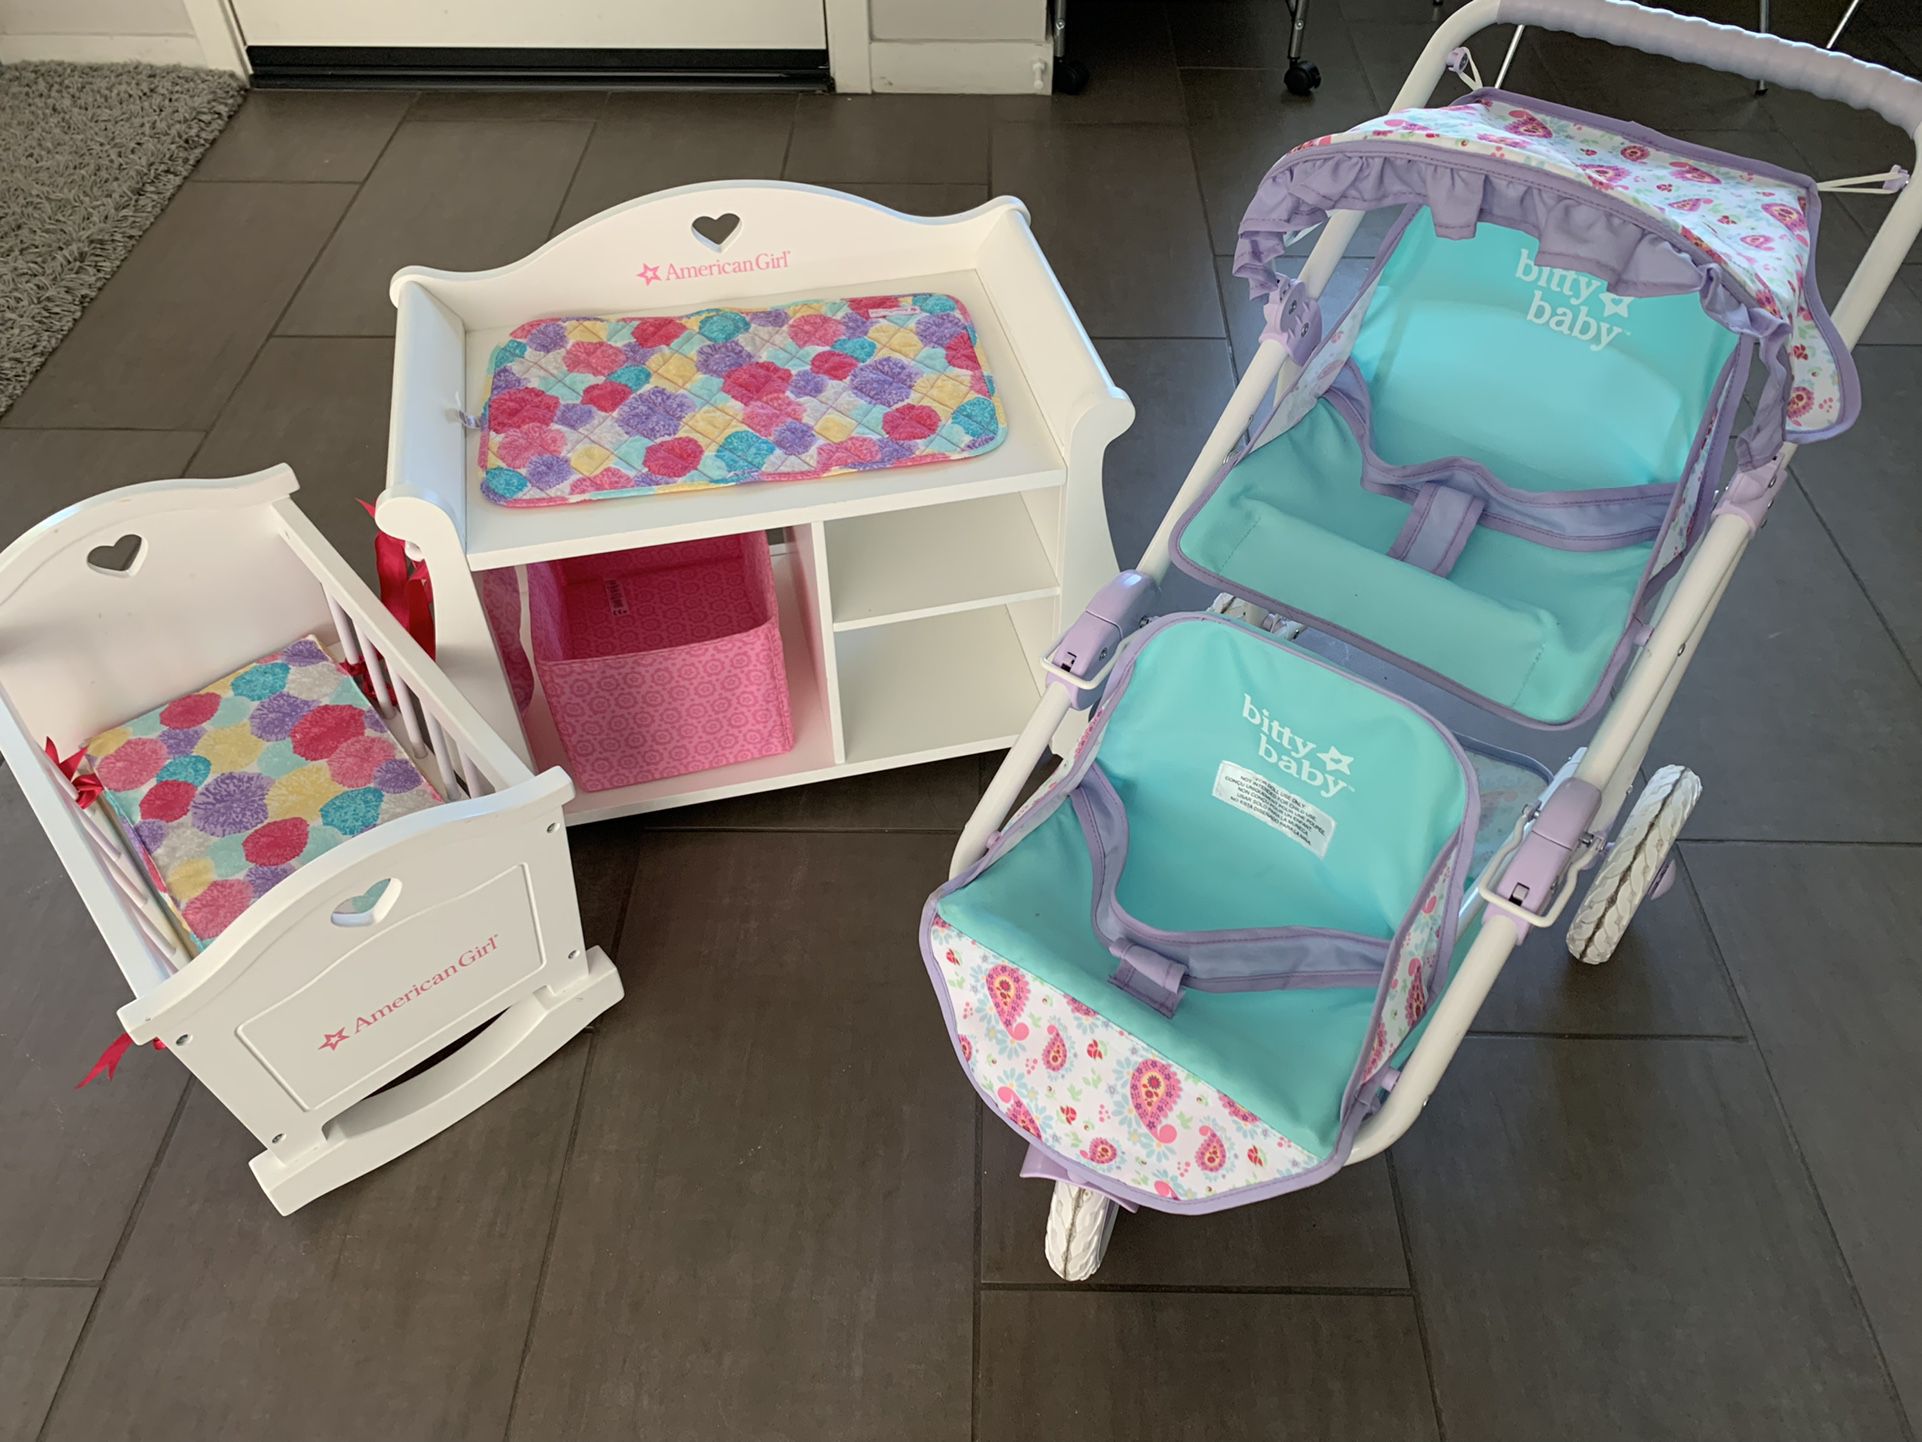 Bitty Baby Stroller & American Girl Changing Table With Crib!!